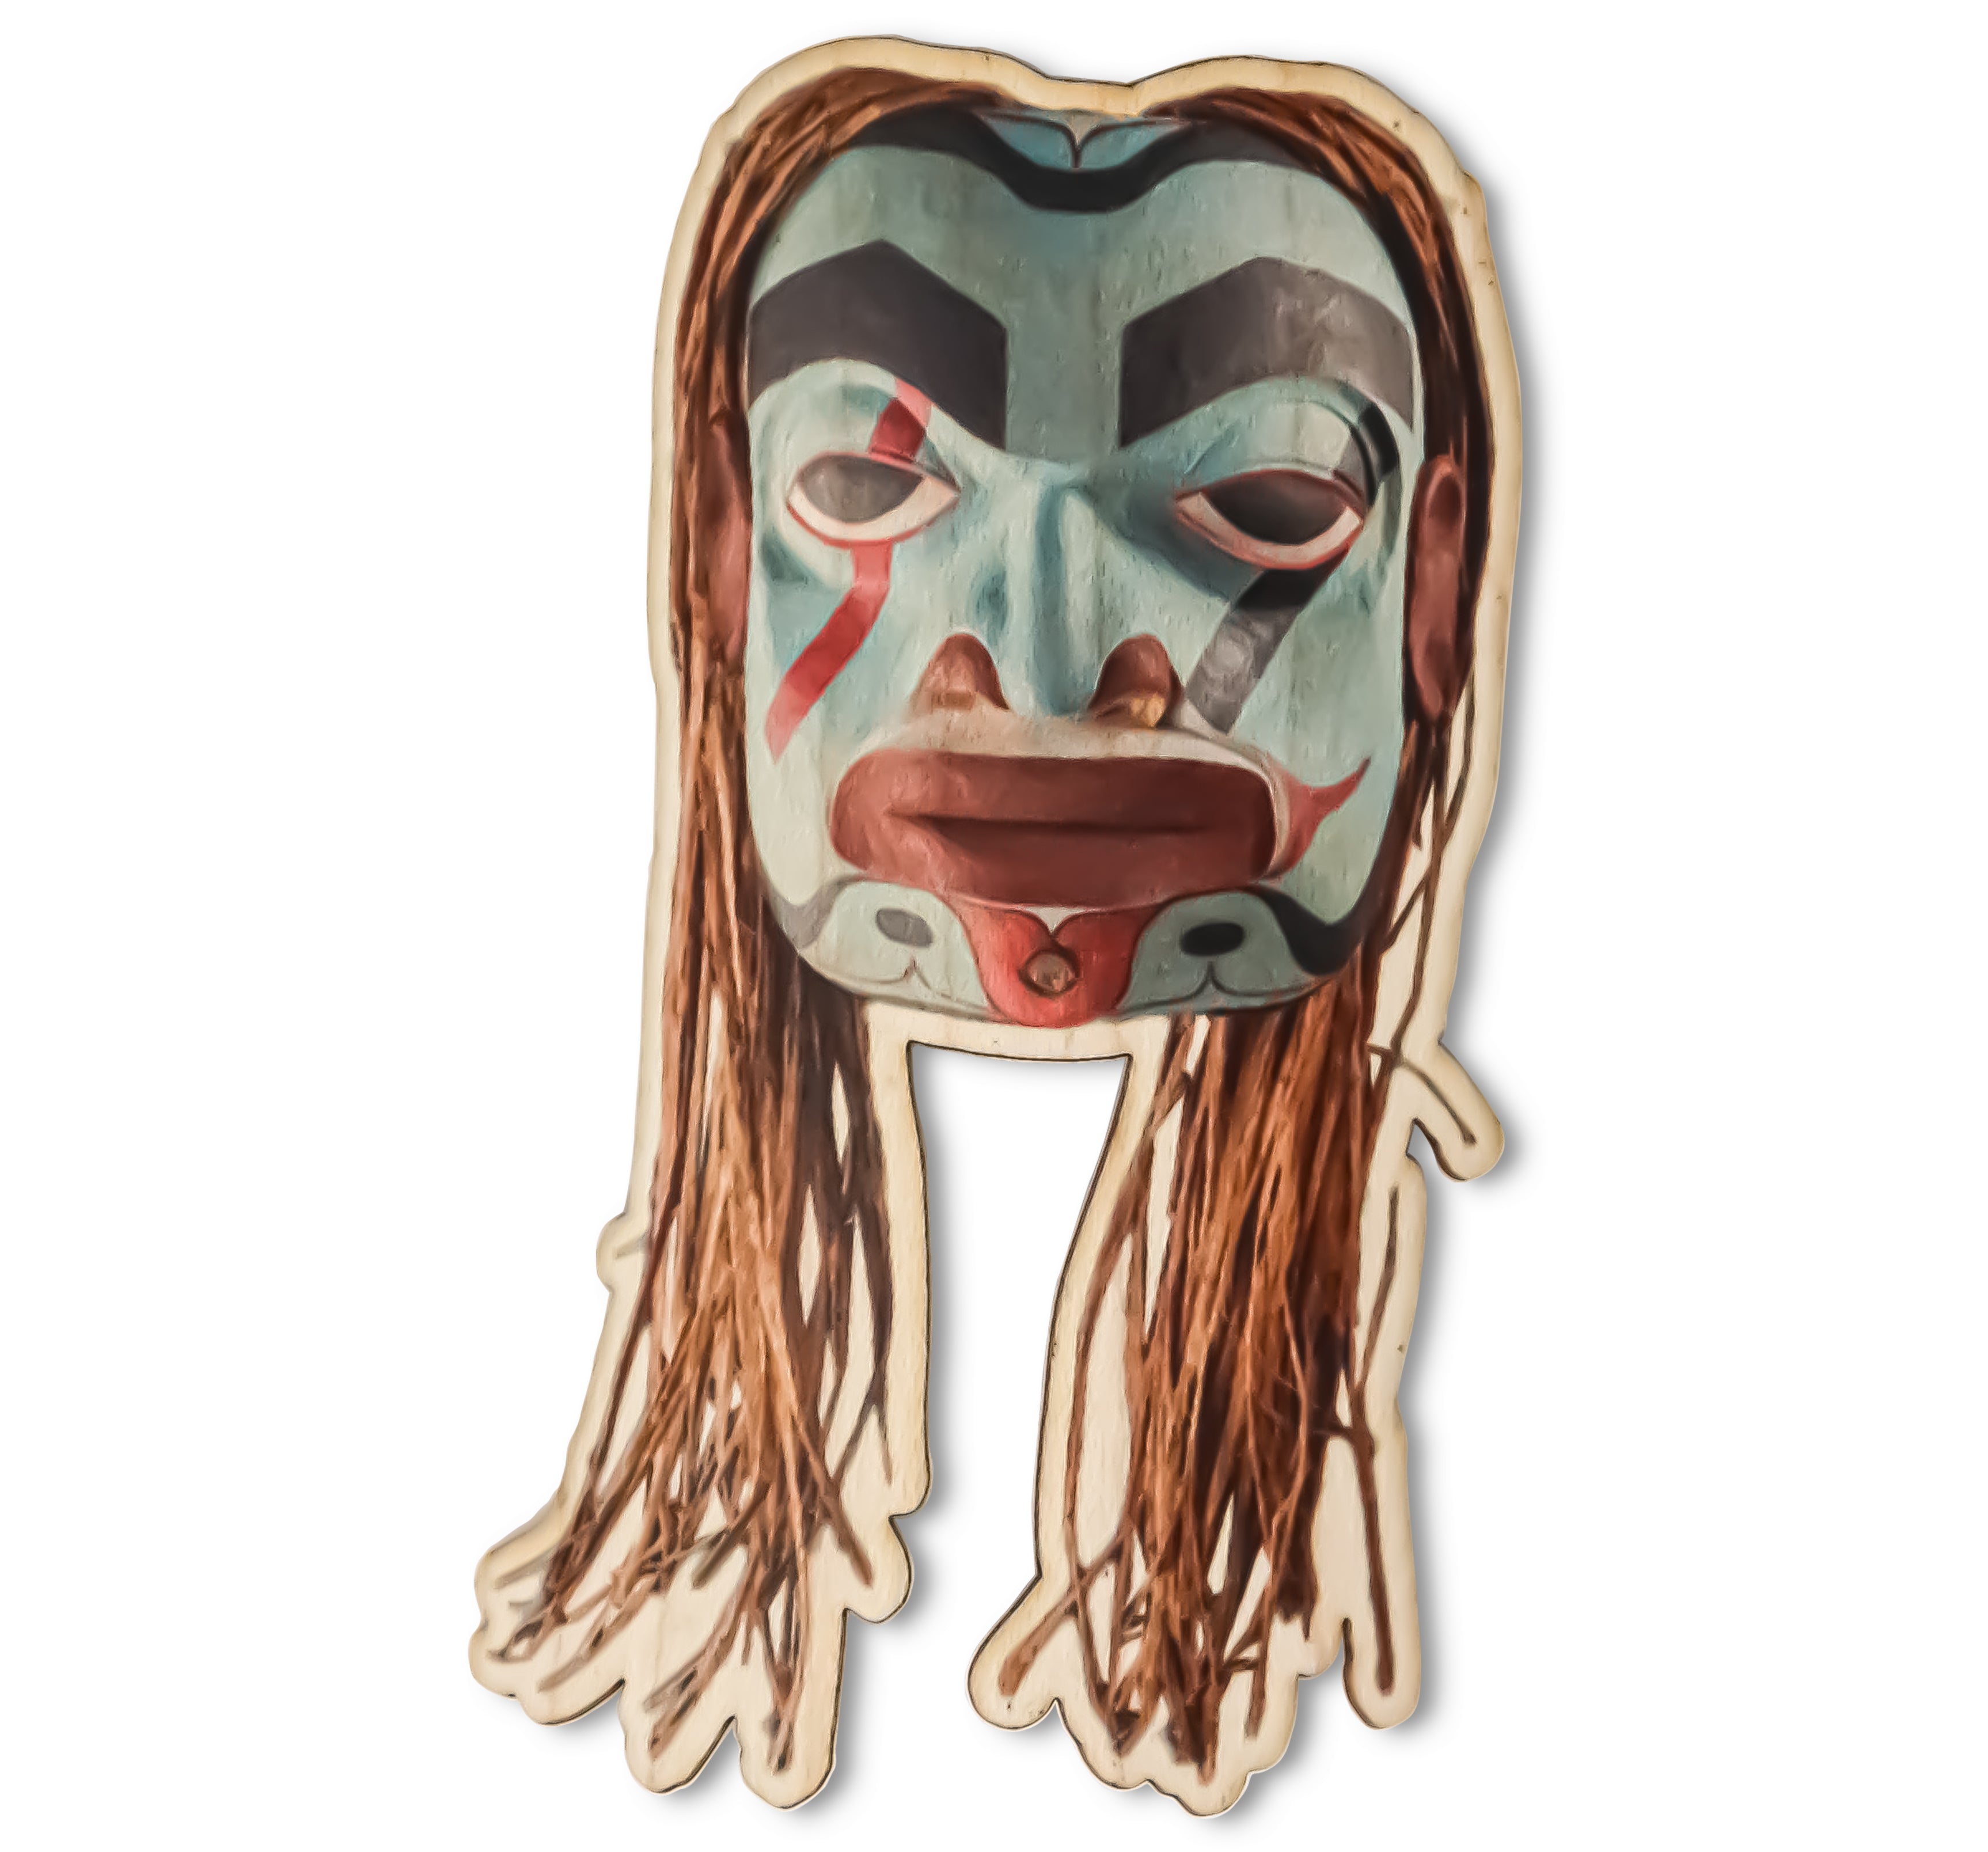 Alaskan Native Female Shaman Mask Native Wooden Sticker originally carved and painted by Fred Fulmer Tlingit Artist